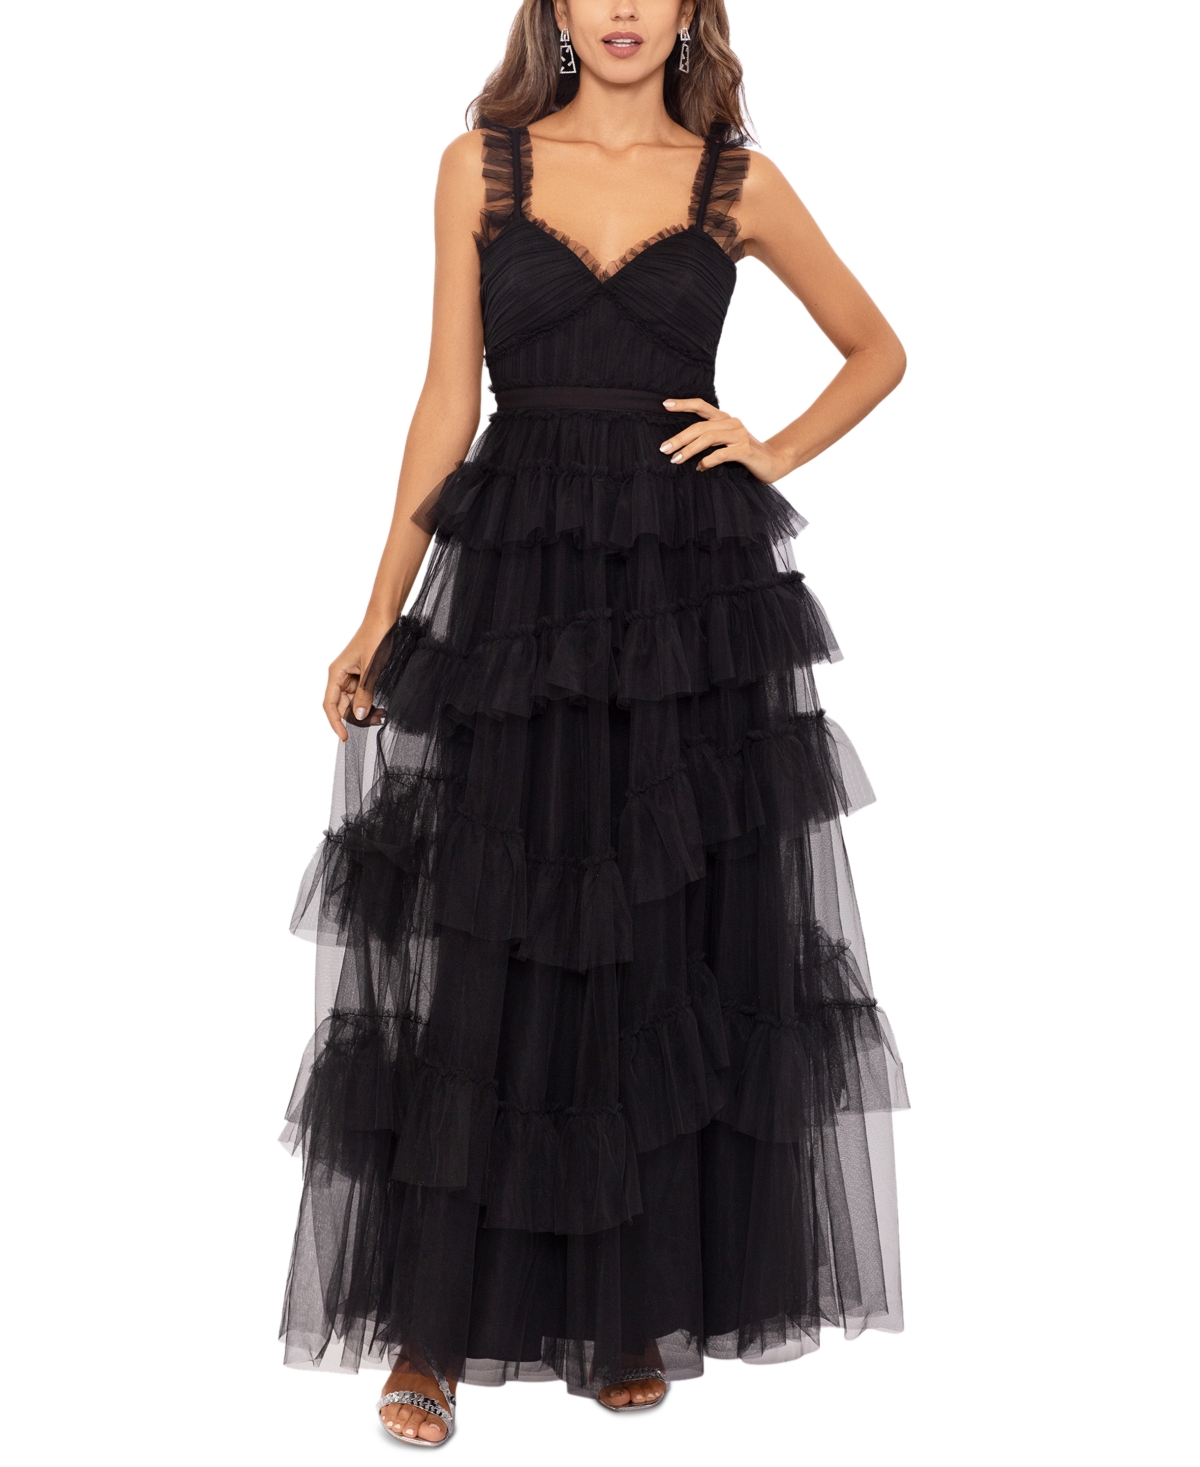 1940s Formal Dresses, Evening Gowns History Betsy  Adam Womens Ruffled Tiered Gown - Black $299.00 AT vintagedancer.com